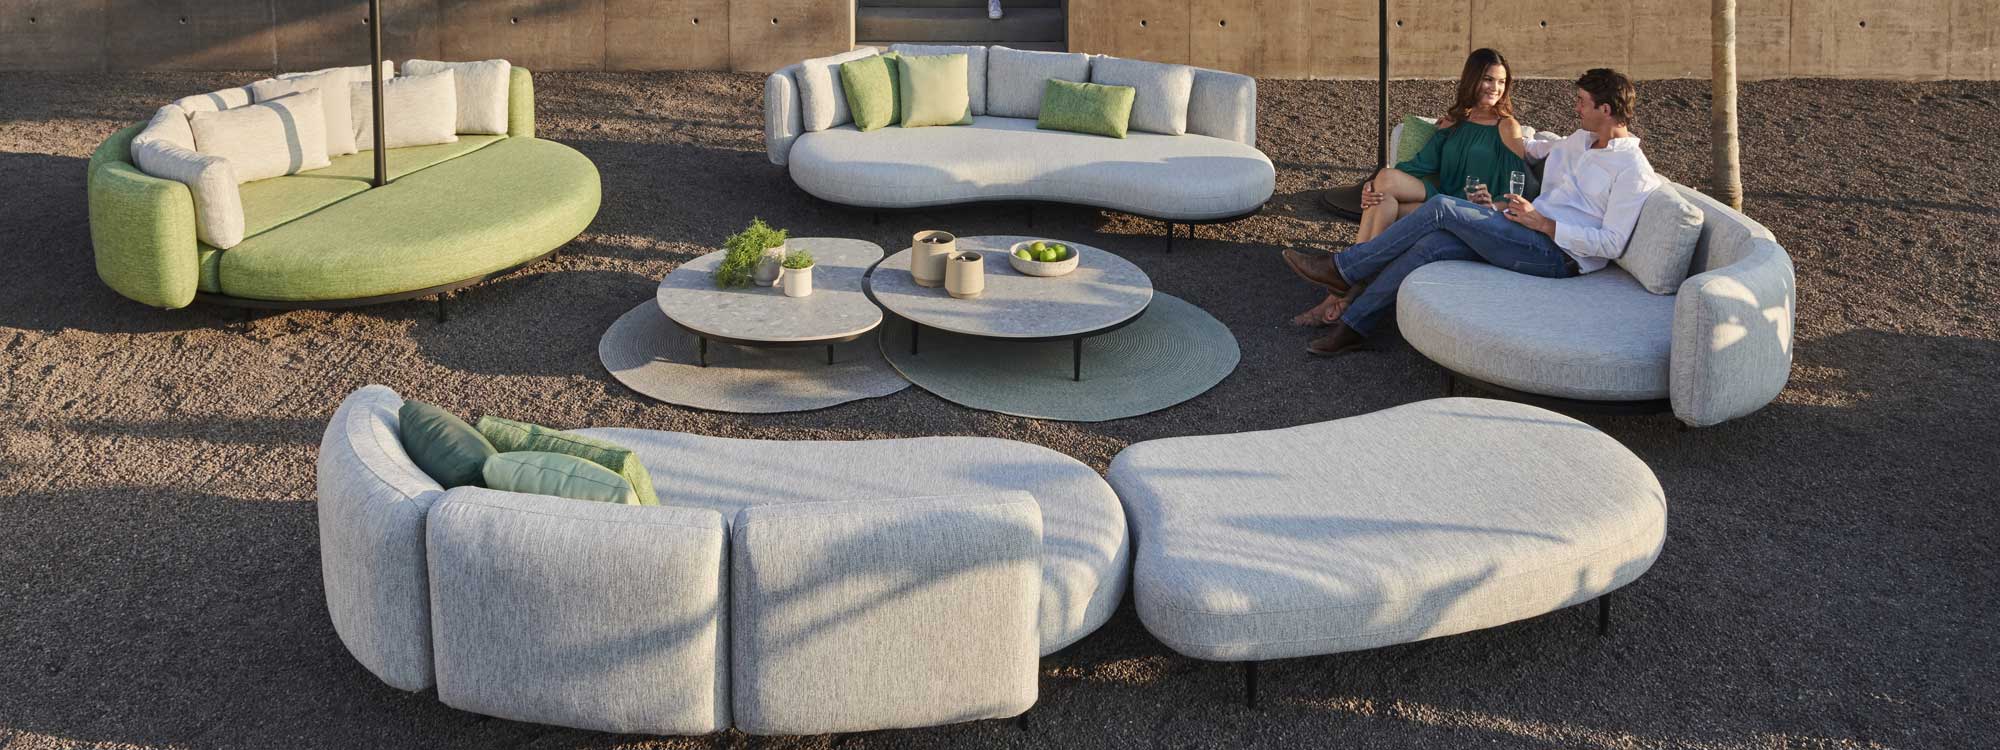 Avoid long lead times with Our Ready To Ship garden furniture, including luxury teak garden sofas, modern patio heaters & designer fire pits. Organix modern garden sofa is a curvaceous outdoor sofa in all-weather outdoor furniture materials by Royal Botania luxury garden furniture